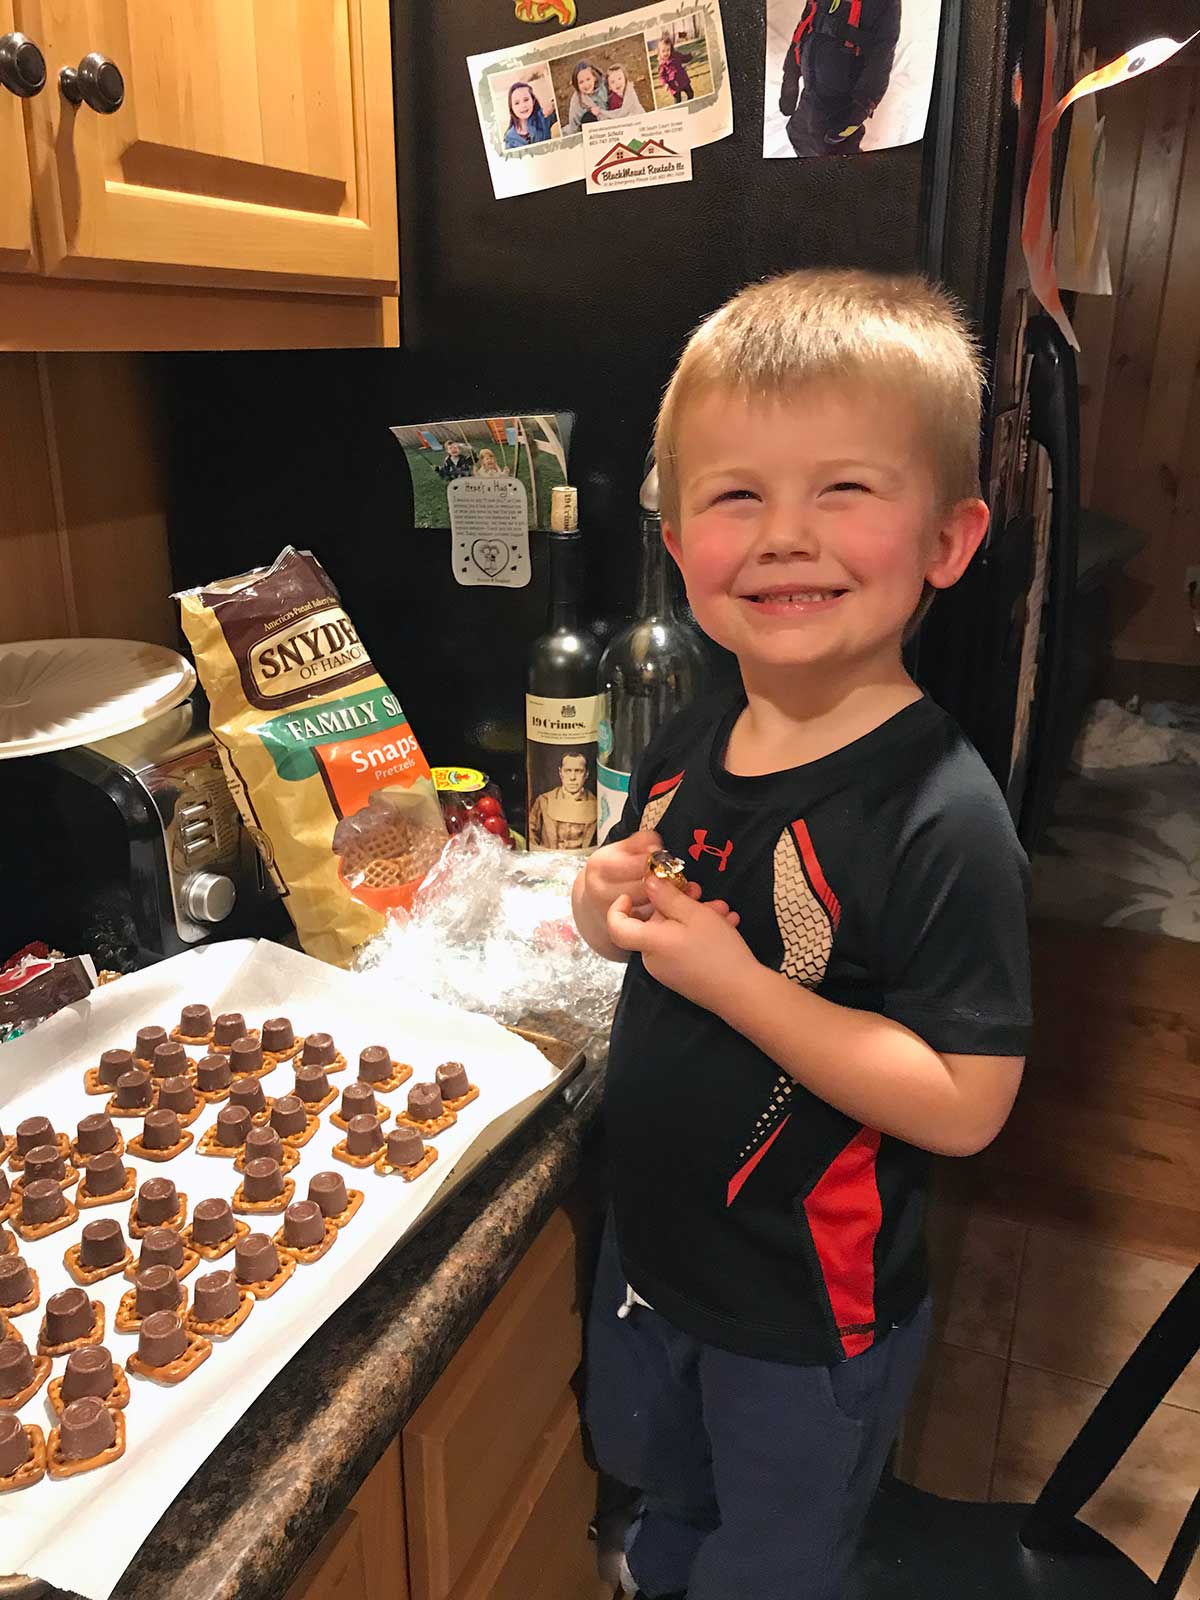 A small child making no-bake energy bites at home, smiling